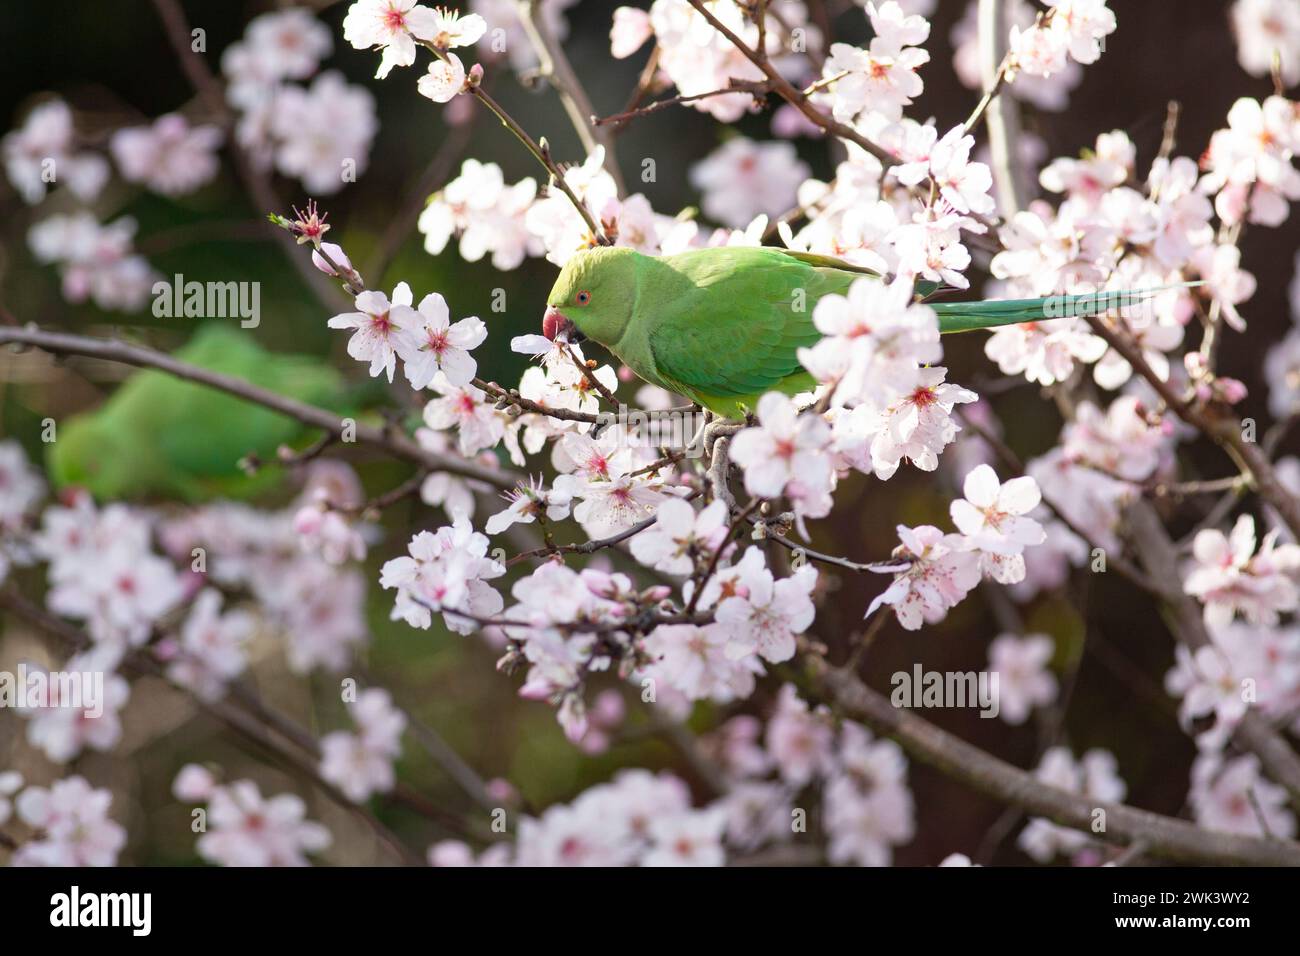 UK weather, 18 February 2024: Green ringneck (or rose-ringed) parakeets in a garden in Clapham, south London, eat the blossoms of an almond tree during a spell of windy by mild weather in the south of England. Credit: Anna Watson/Alamy Live News Stock Photo